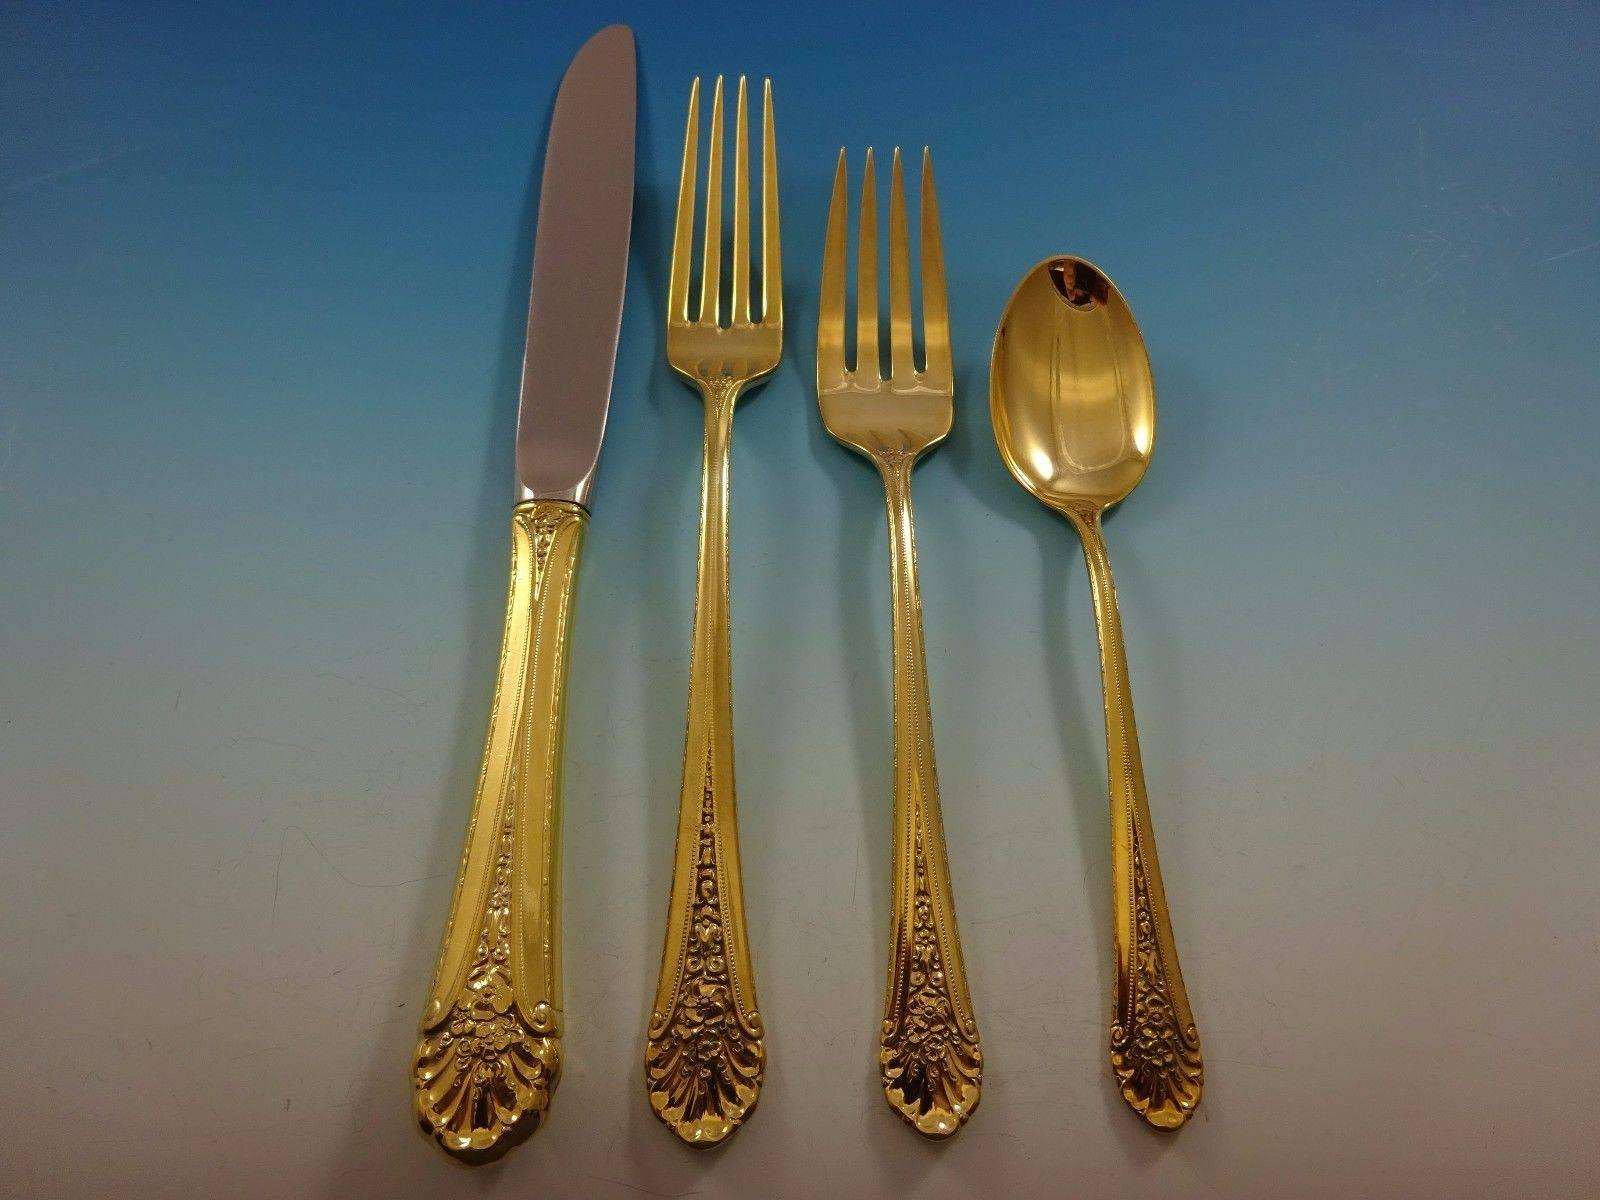 Royal Windsor Gold by Towle sterling silver flatware set - 24 pieces. This set is vermeil (completely gold-washed) and includes: 

Six knives, 8 3/4